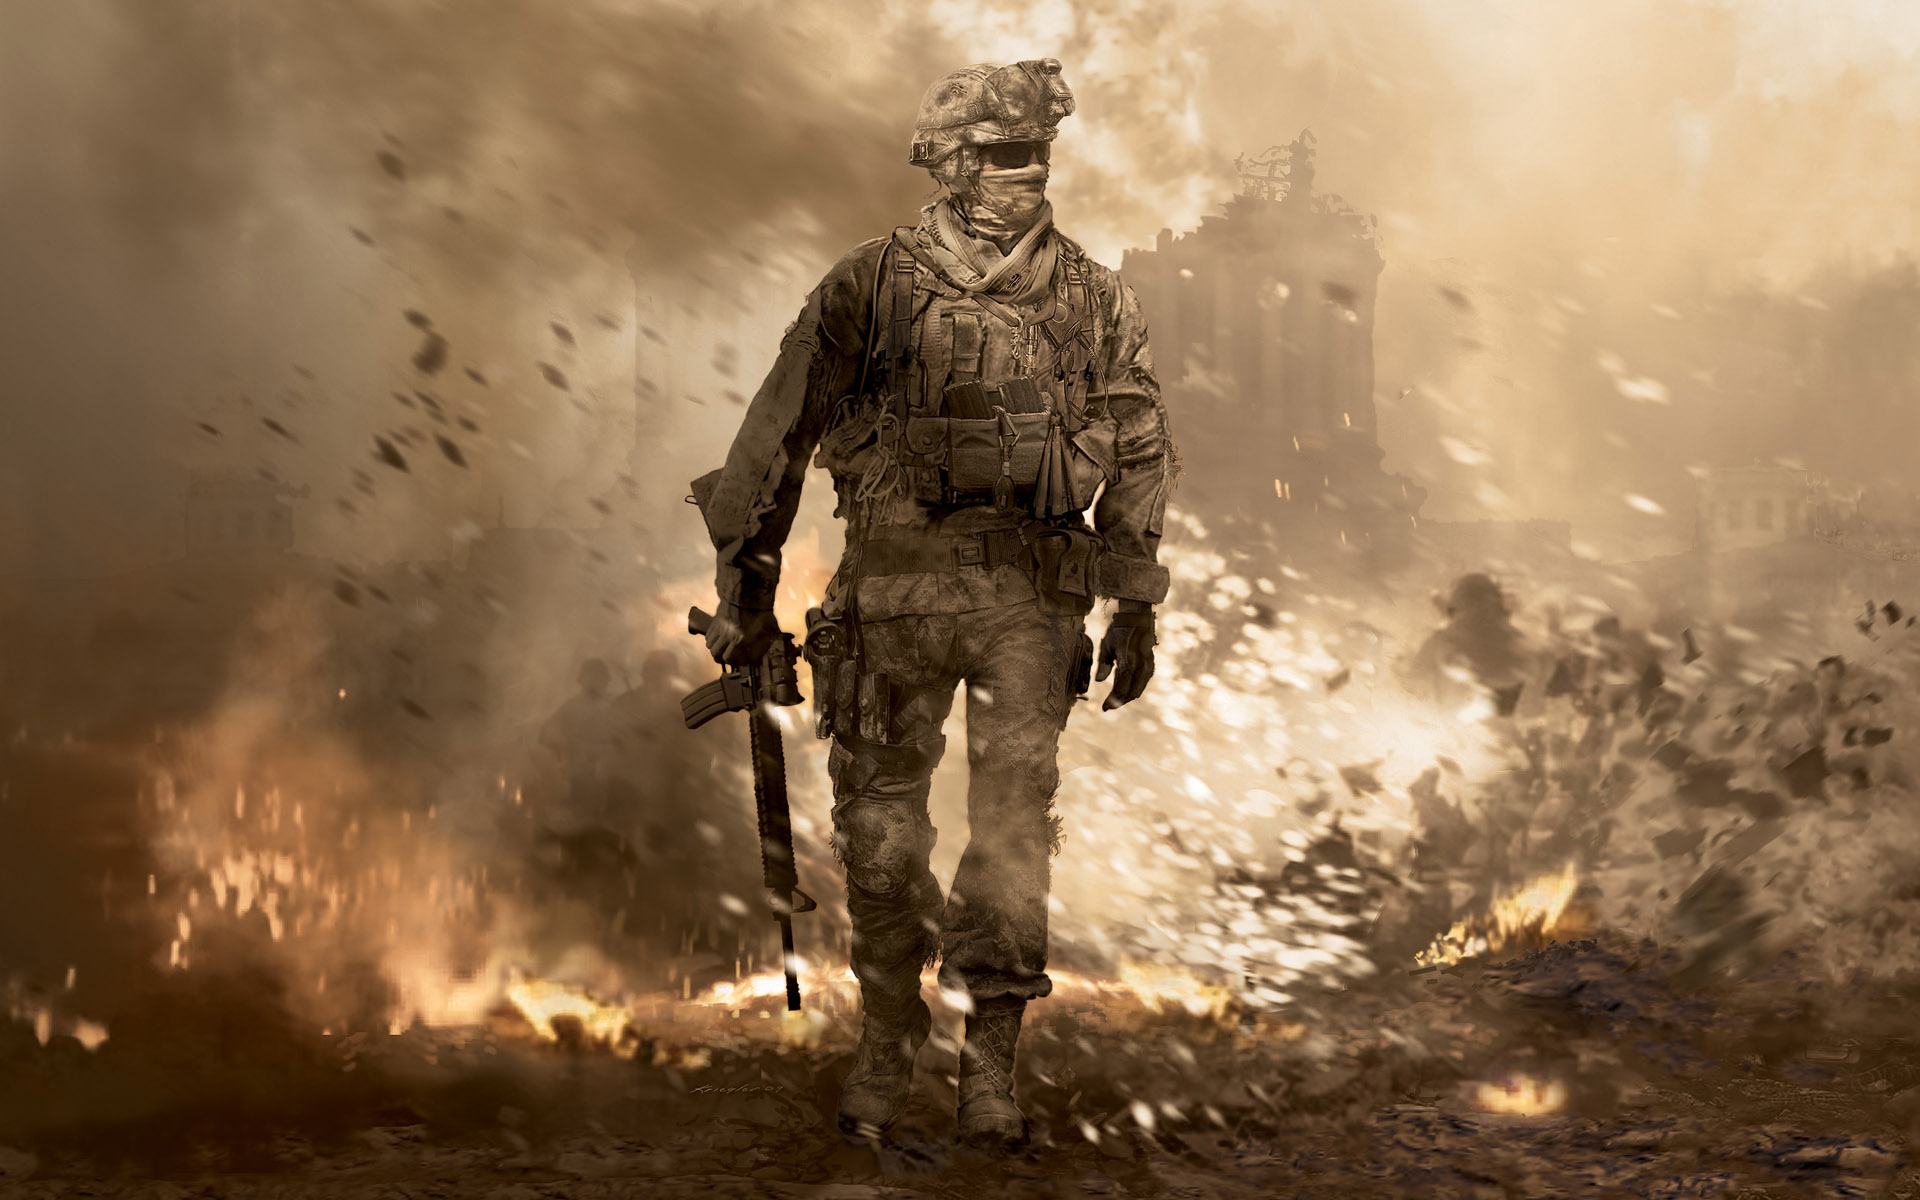 Wallpapers Call of Duty Call of Duty 4: Modern Warfare Games Image ...